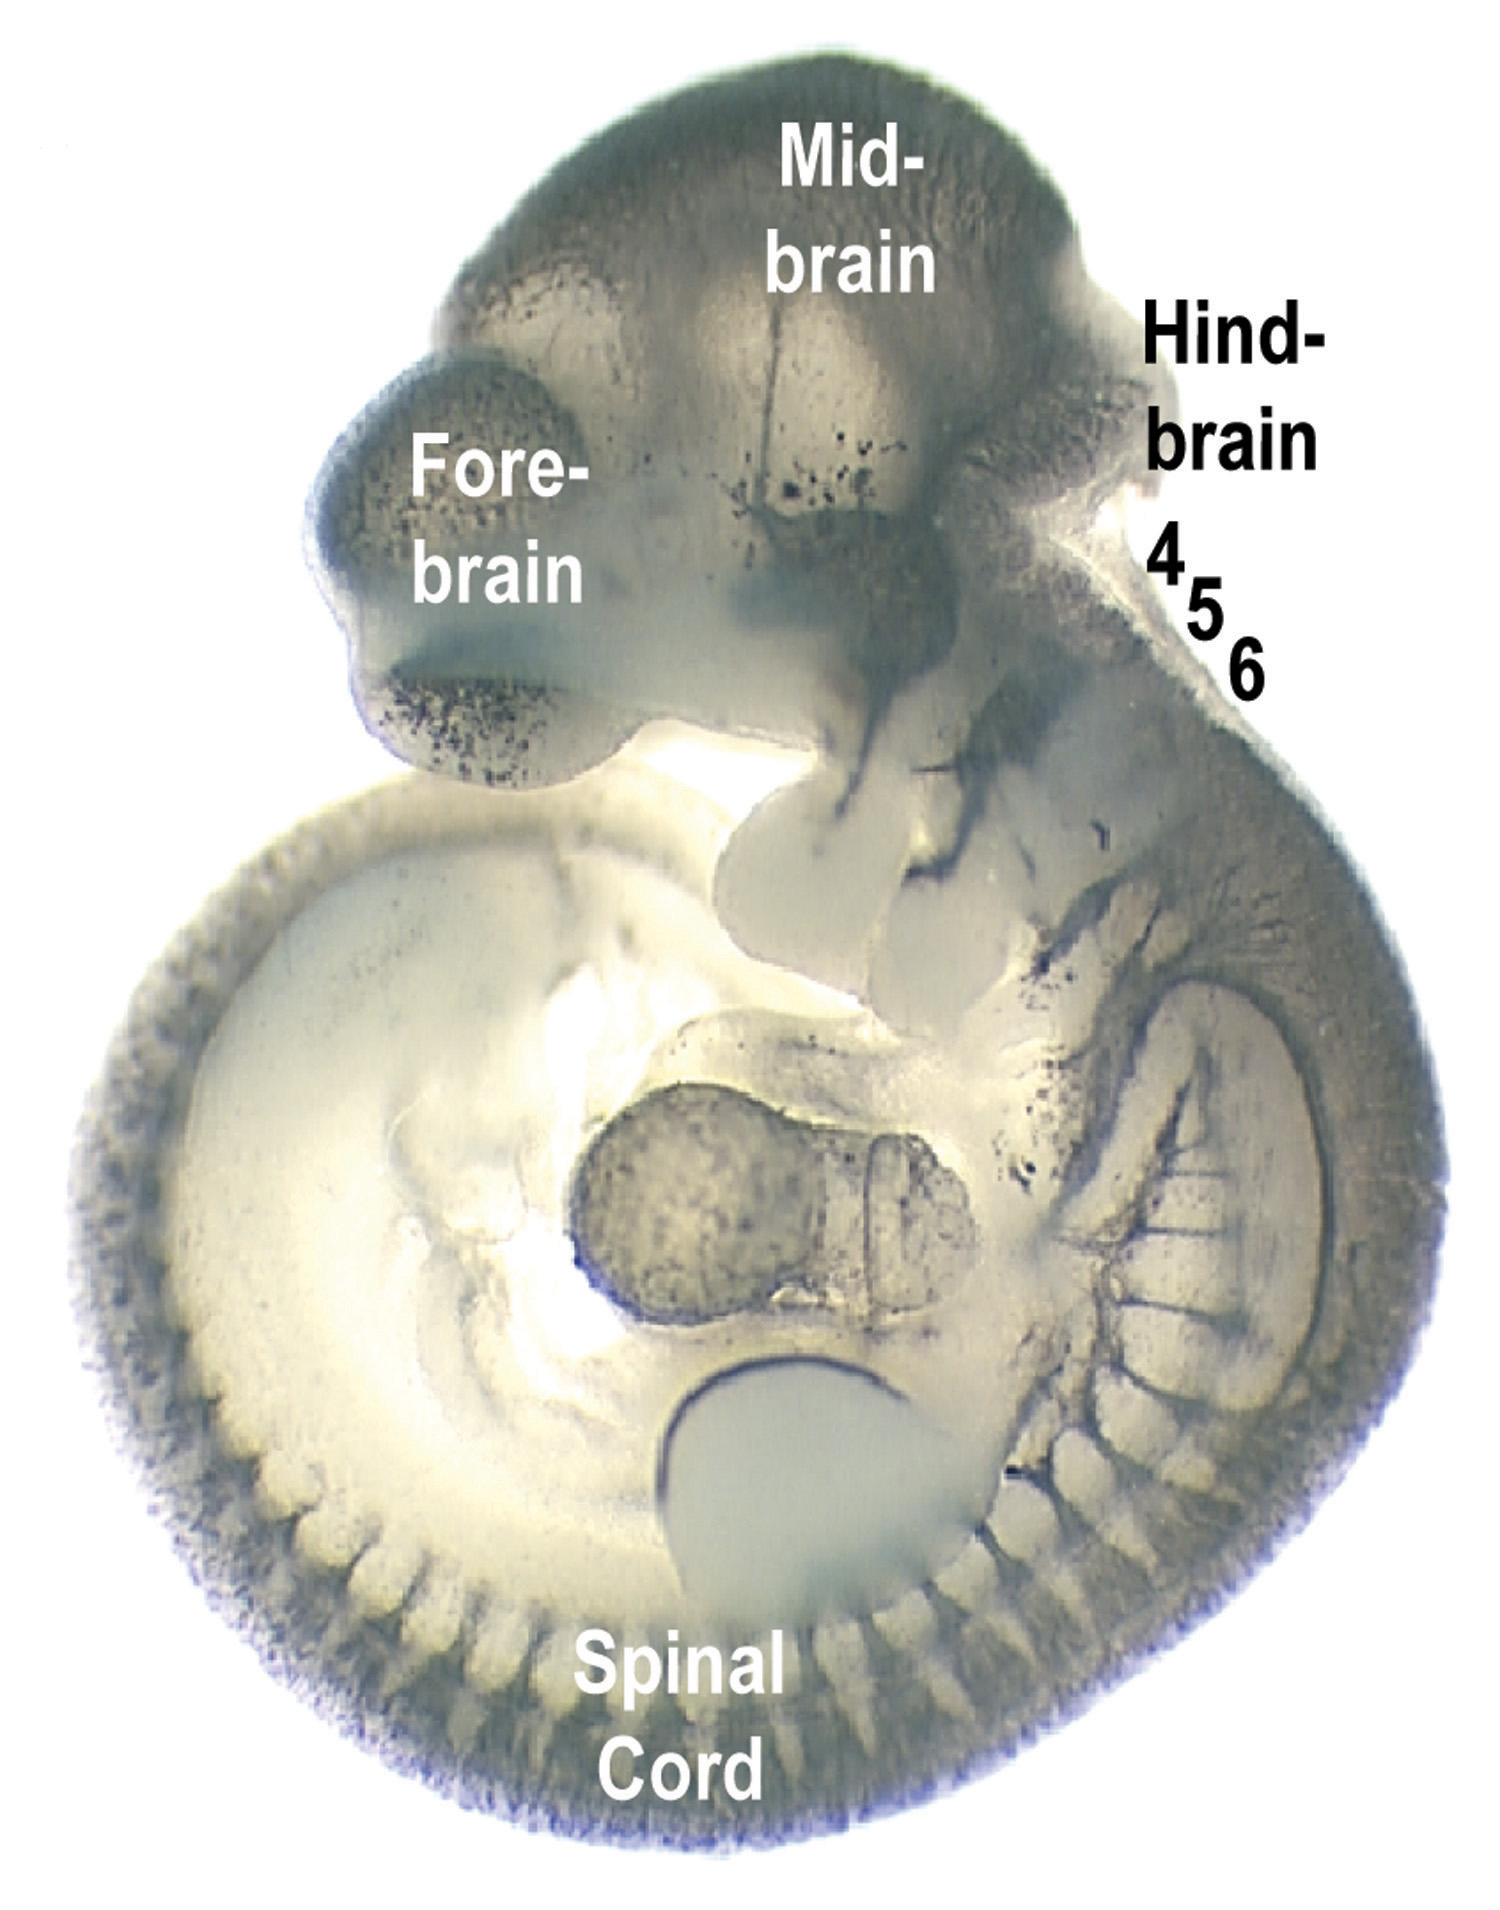 The image of a mouse embryo show different portions of the developing nervous system, including hindbrain segments 4 and 5, where genes guide the formation of nerves controlling facial expressions and eyeball movements.